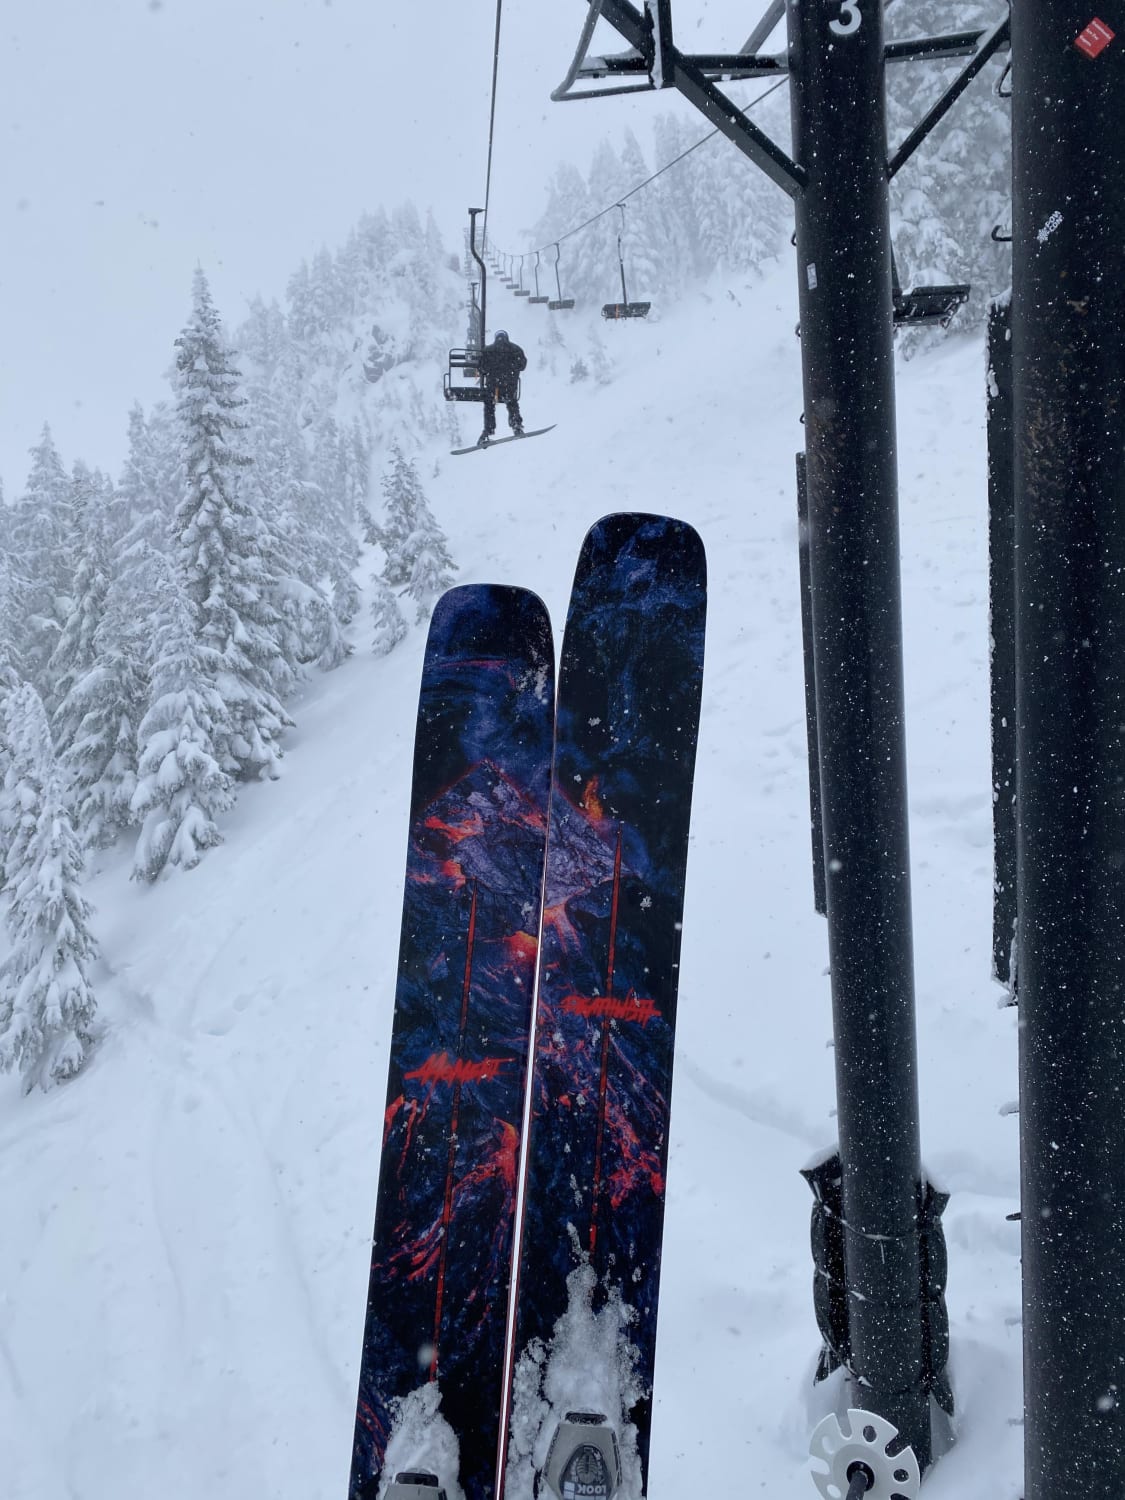 Fun fact: Seventh Heaven on stevens pass is the steepest chair lift in North America.